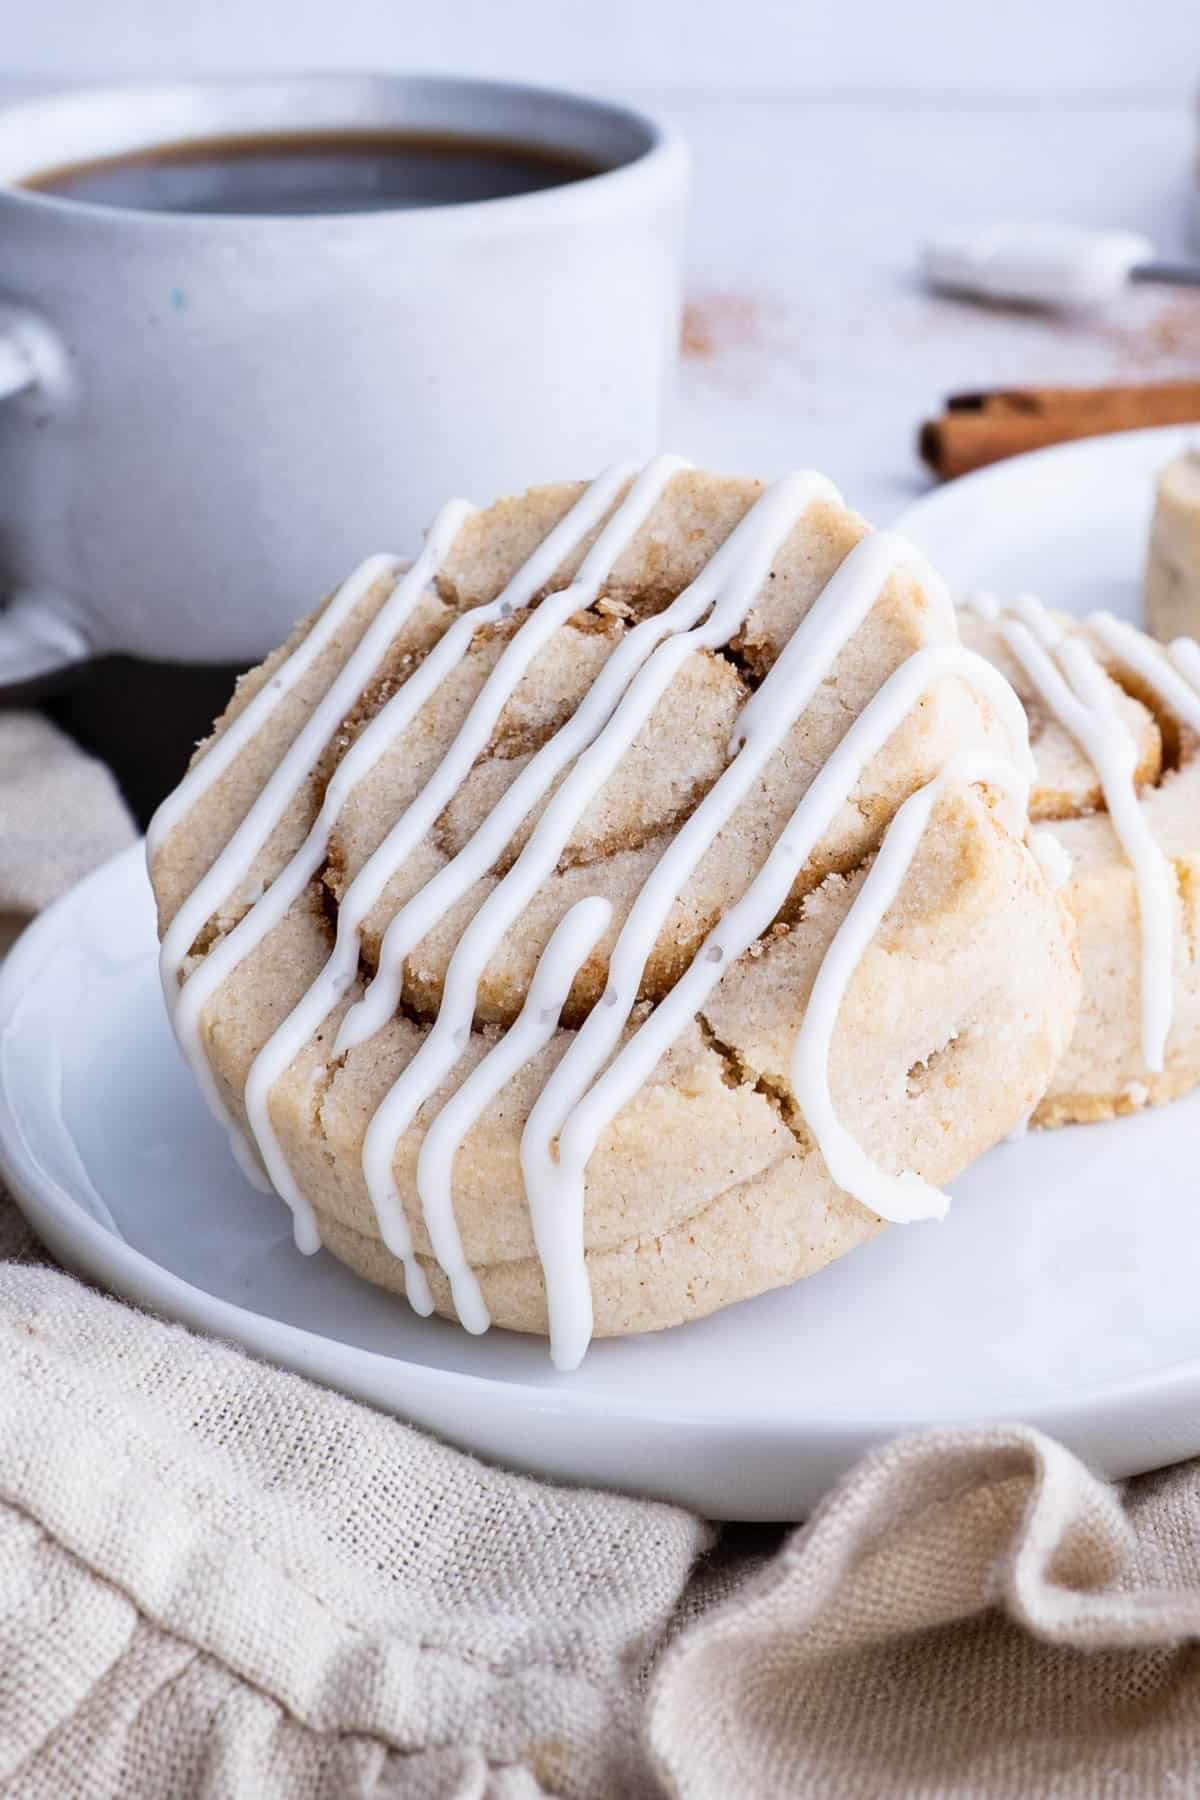 Two cinnamon Roll cookies are served on a white plate with coffee.